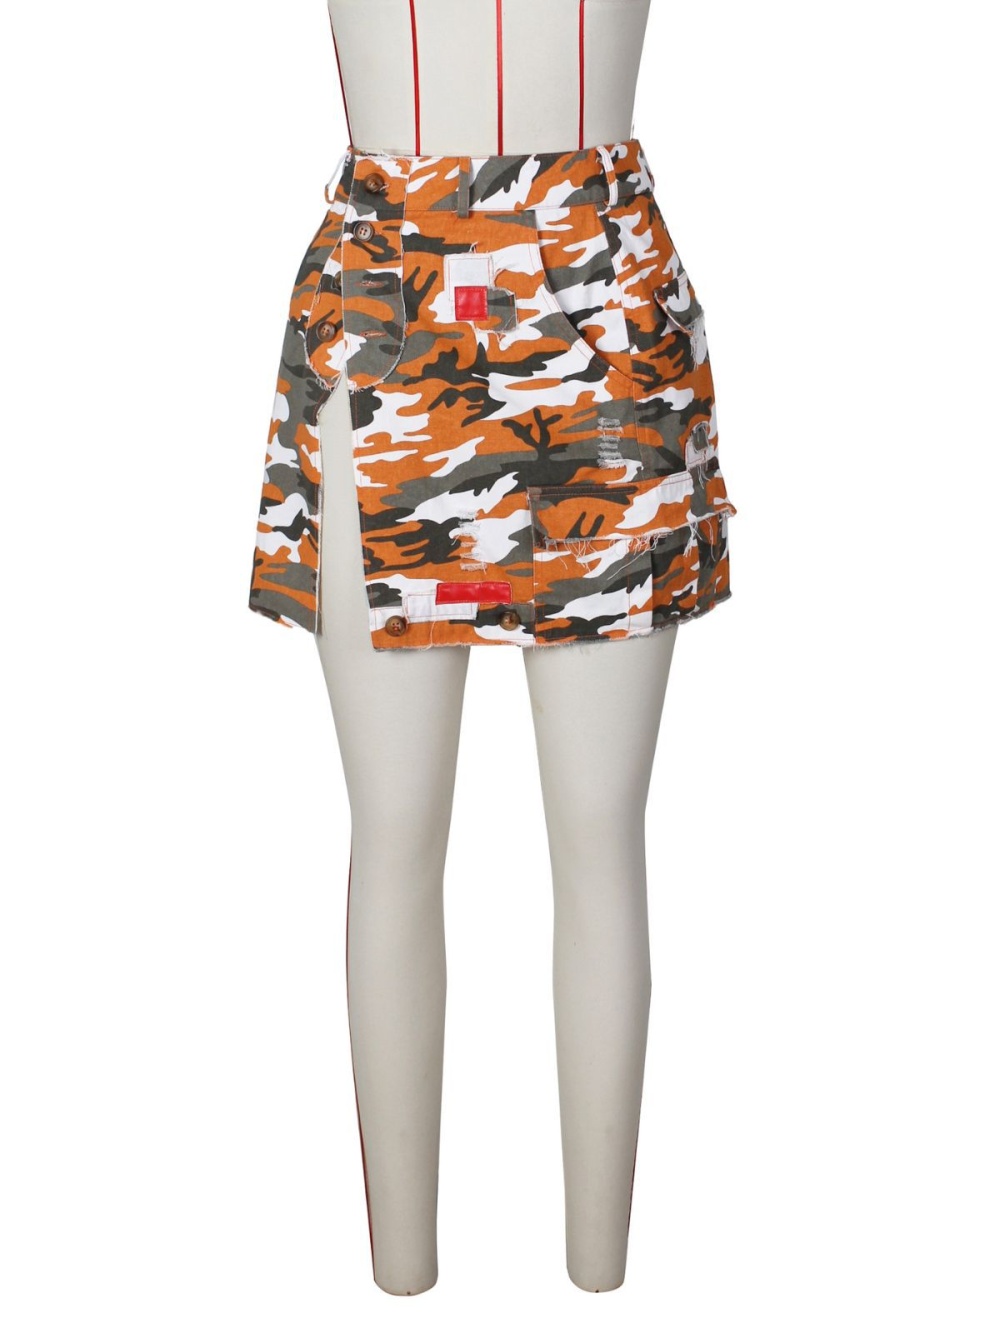 Fashion camouflage short skirt patch skirt